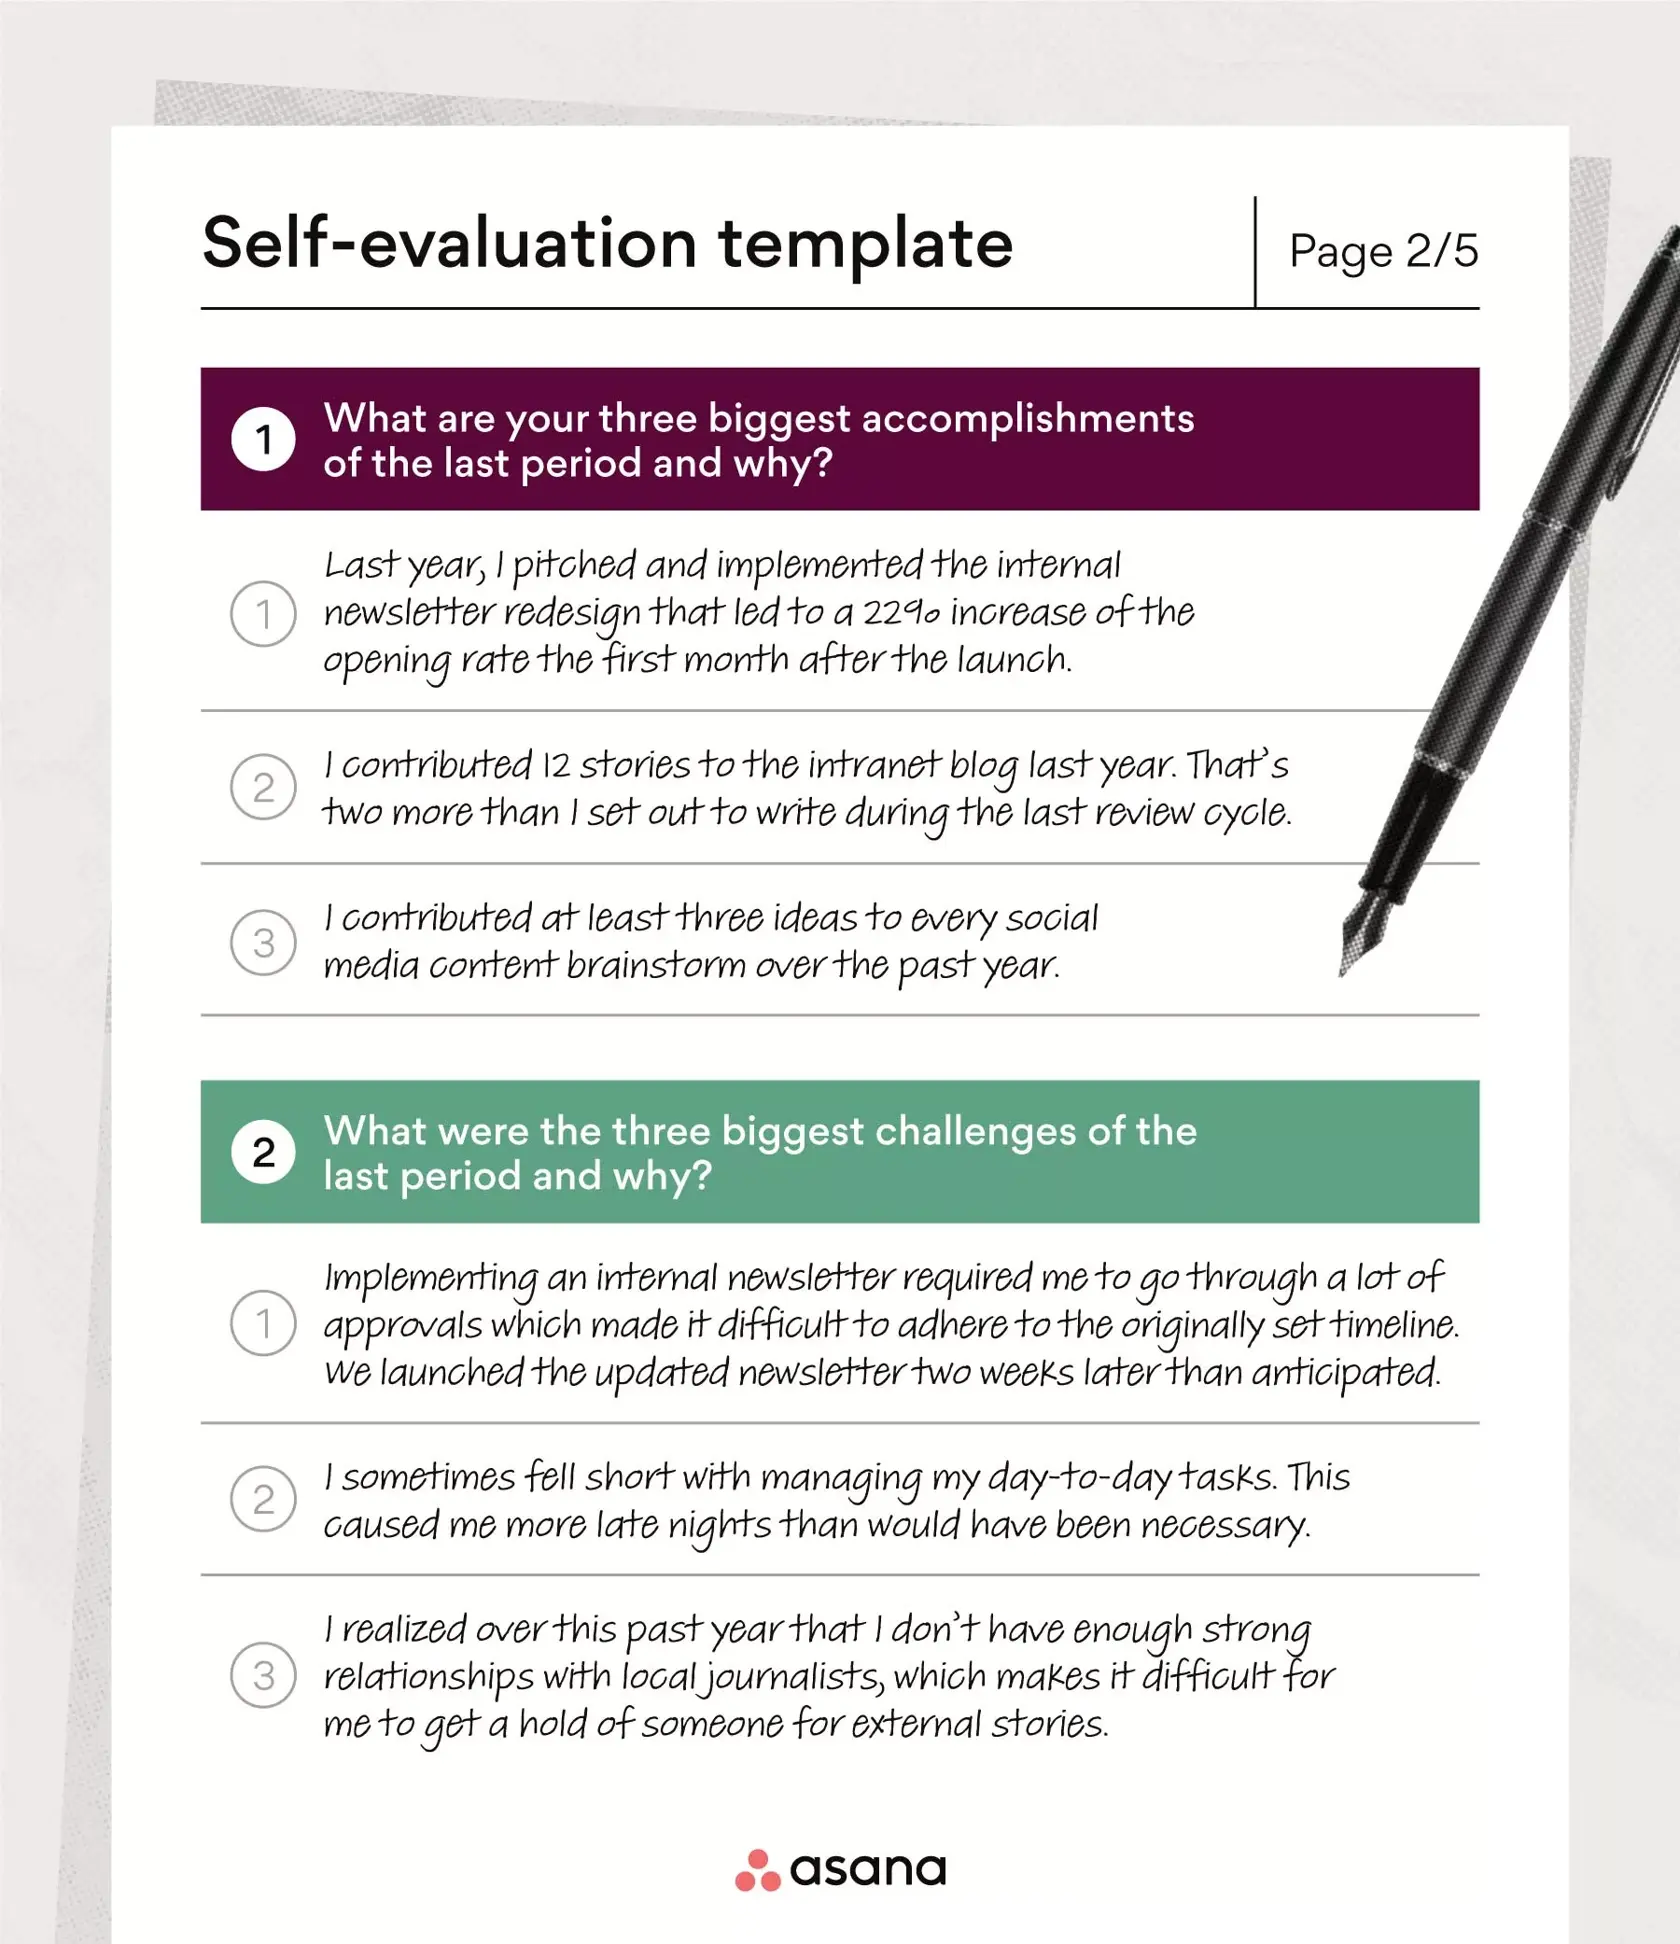 [inline illustration] Self-evaluation template (example)